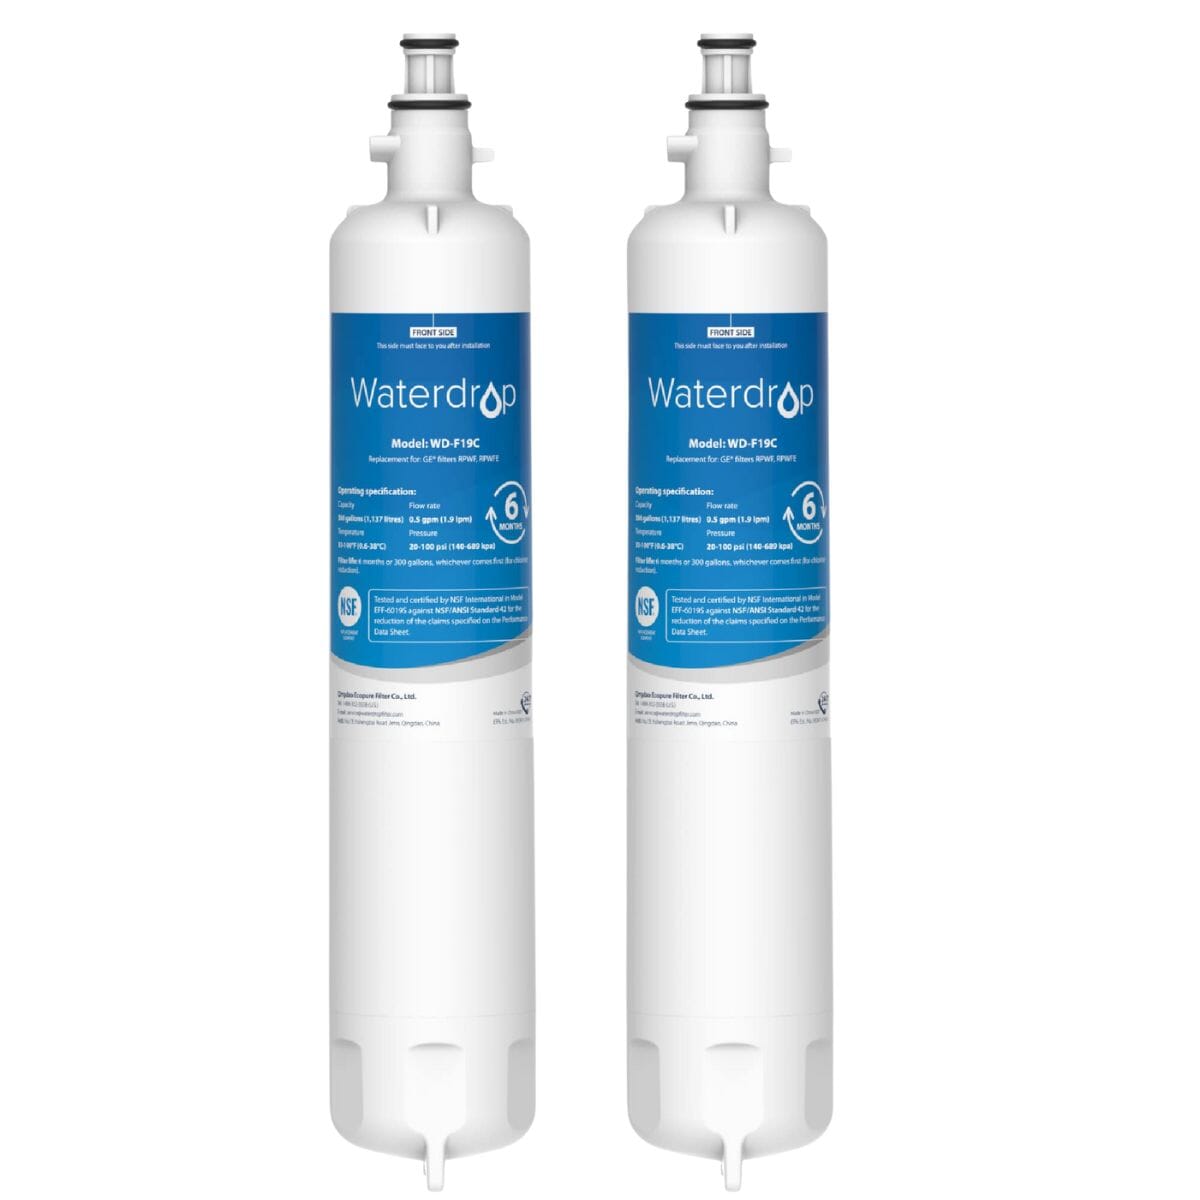 Waterdrop RPWFE Refrigerator Water Filter with Built-in CHIP, Replacement for GE RPWFE, RPWFE3PK, RPWF, and more, comes in a pack of 3 filters